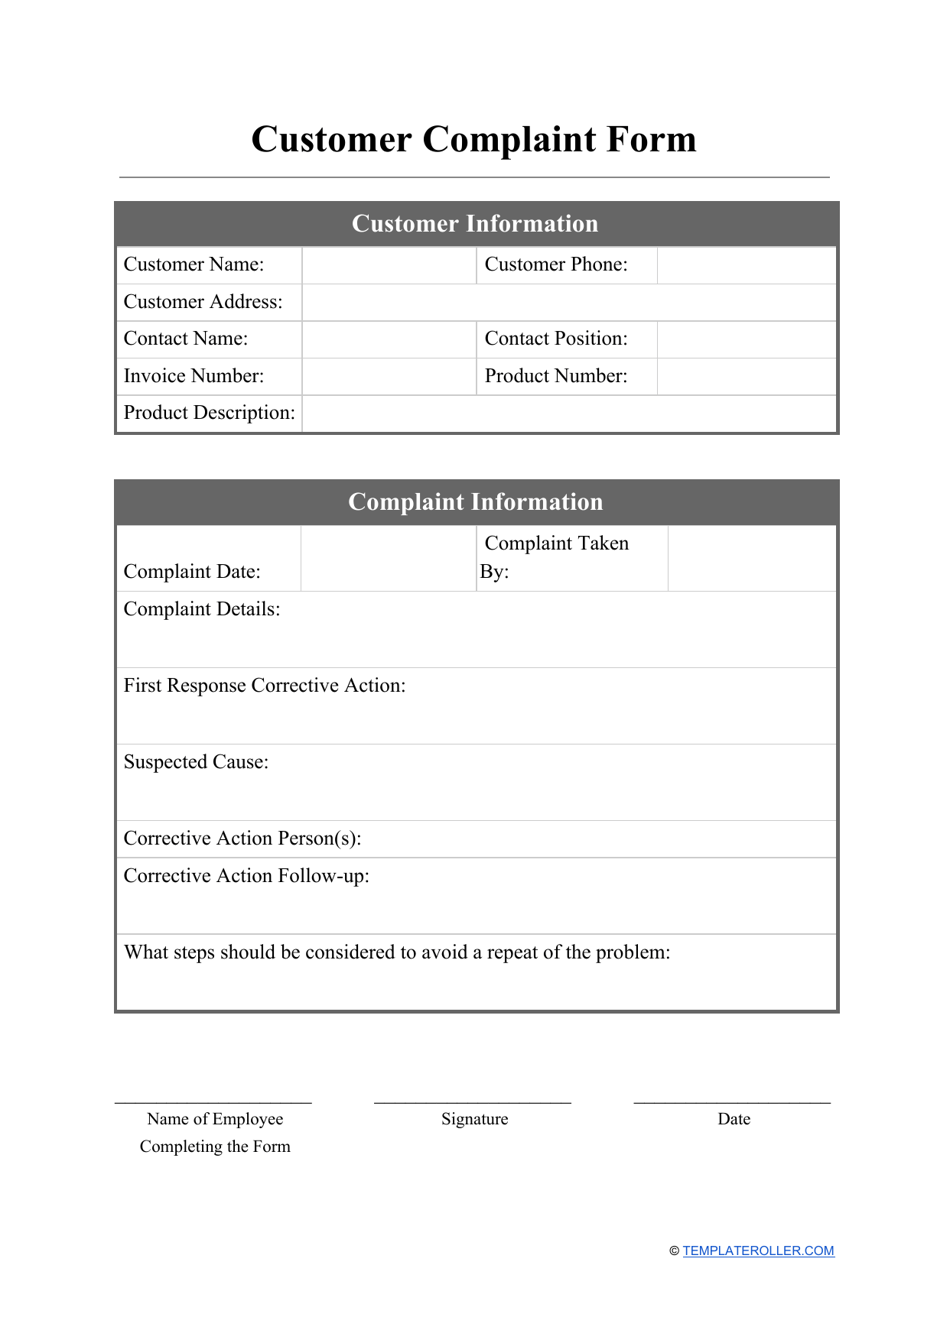 Free Printable Customer Complaint Form Printable Forms Free Online